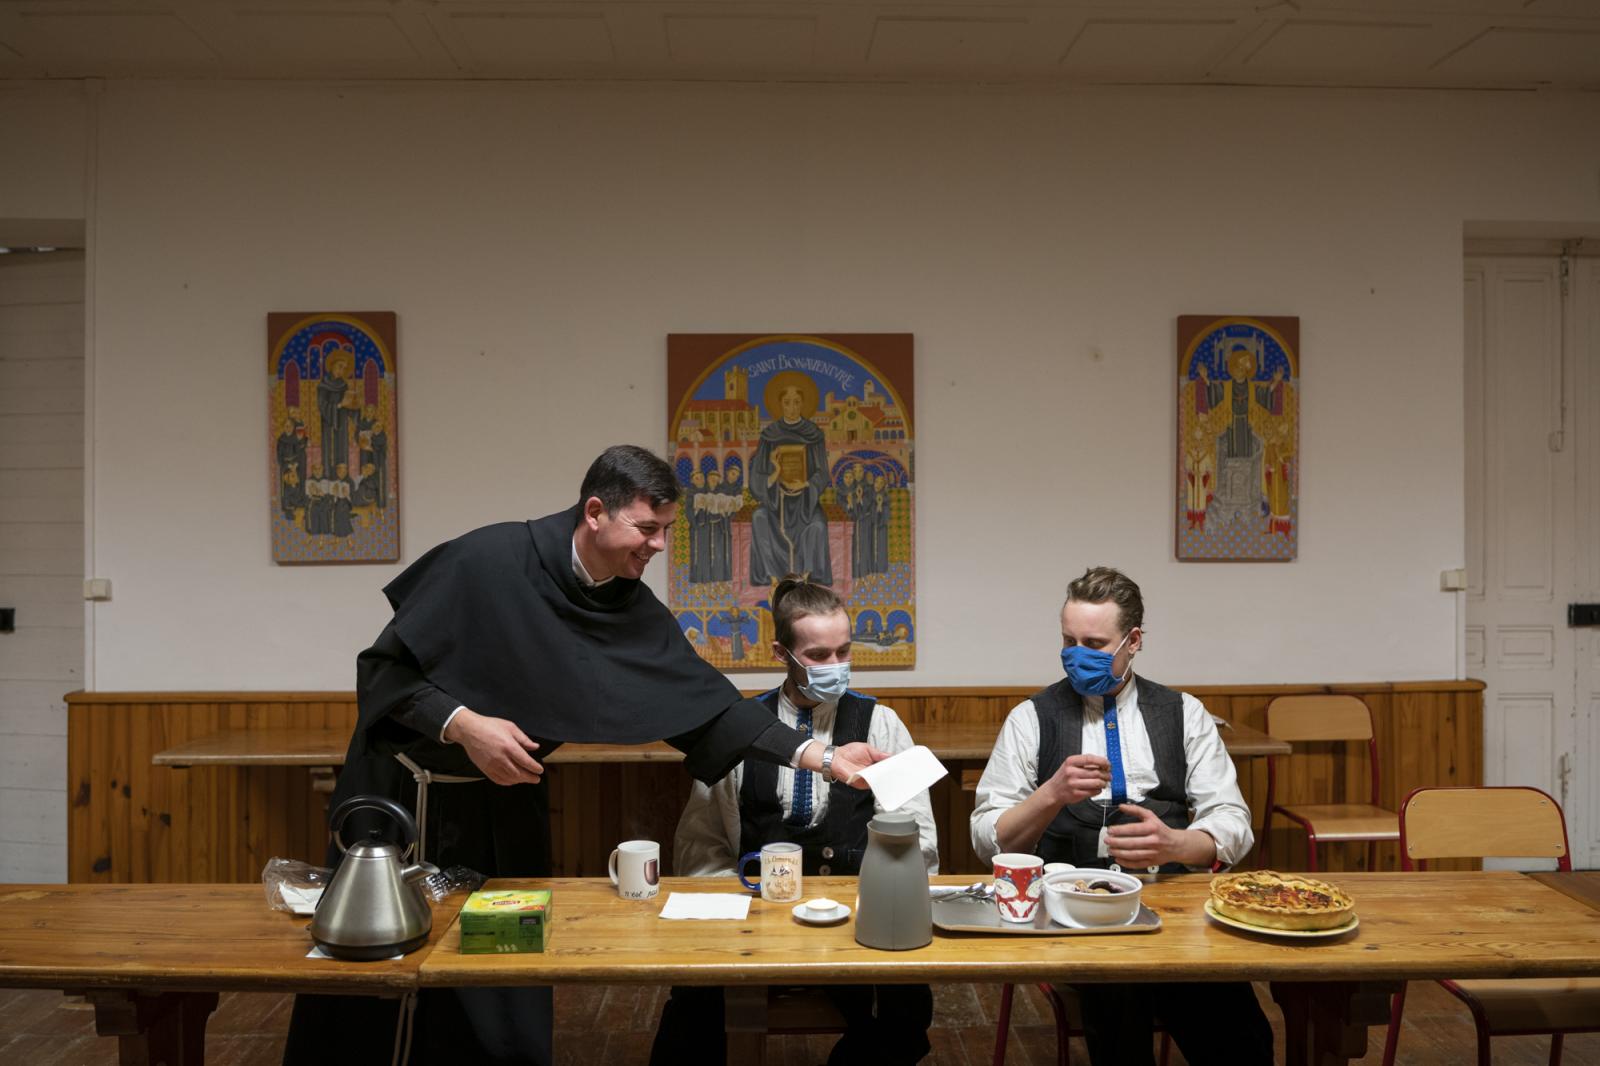   -  Matthias (C) and Ben wearing face masks sit at the table in the common area of the Franciscan...